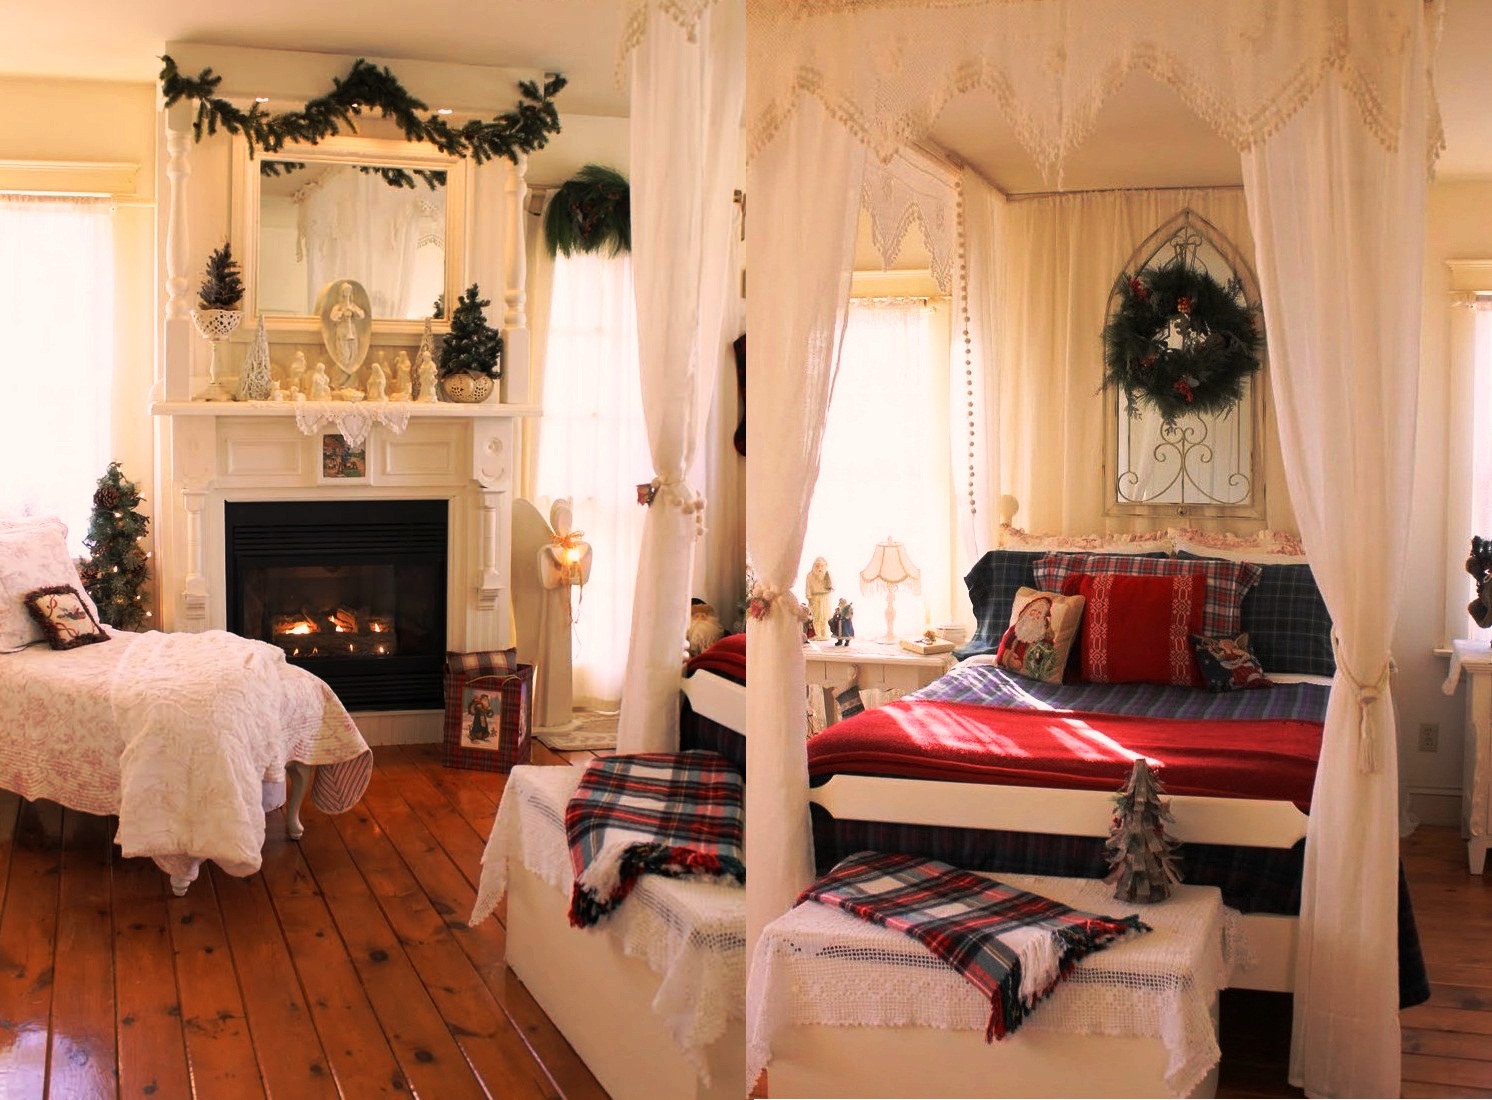 Diy Christmas Decorations For Your Bedroom